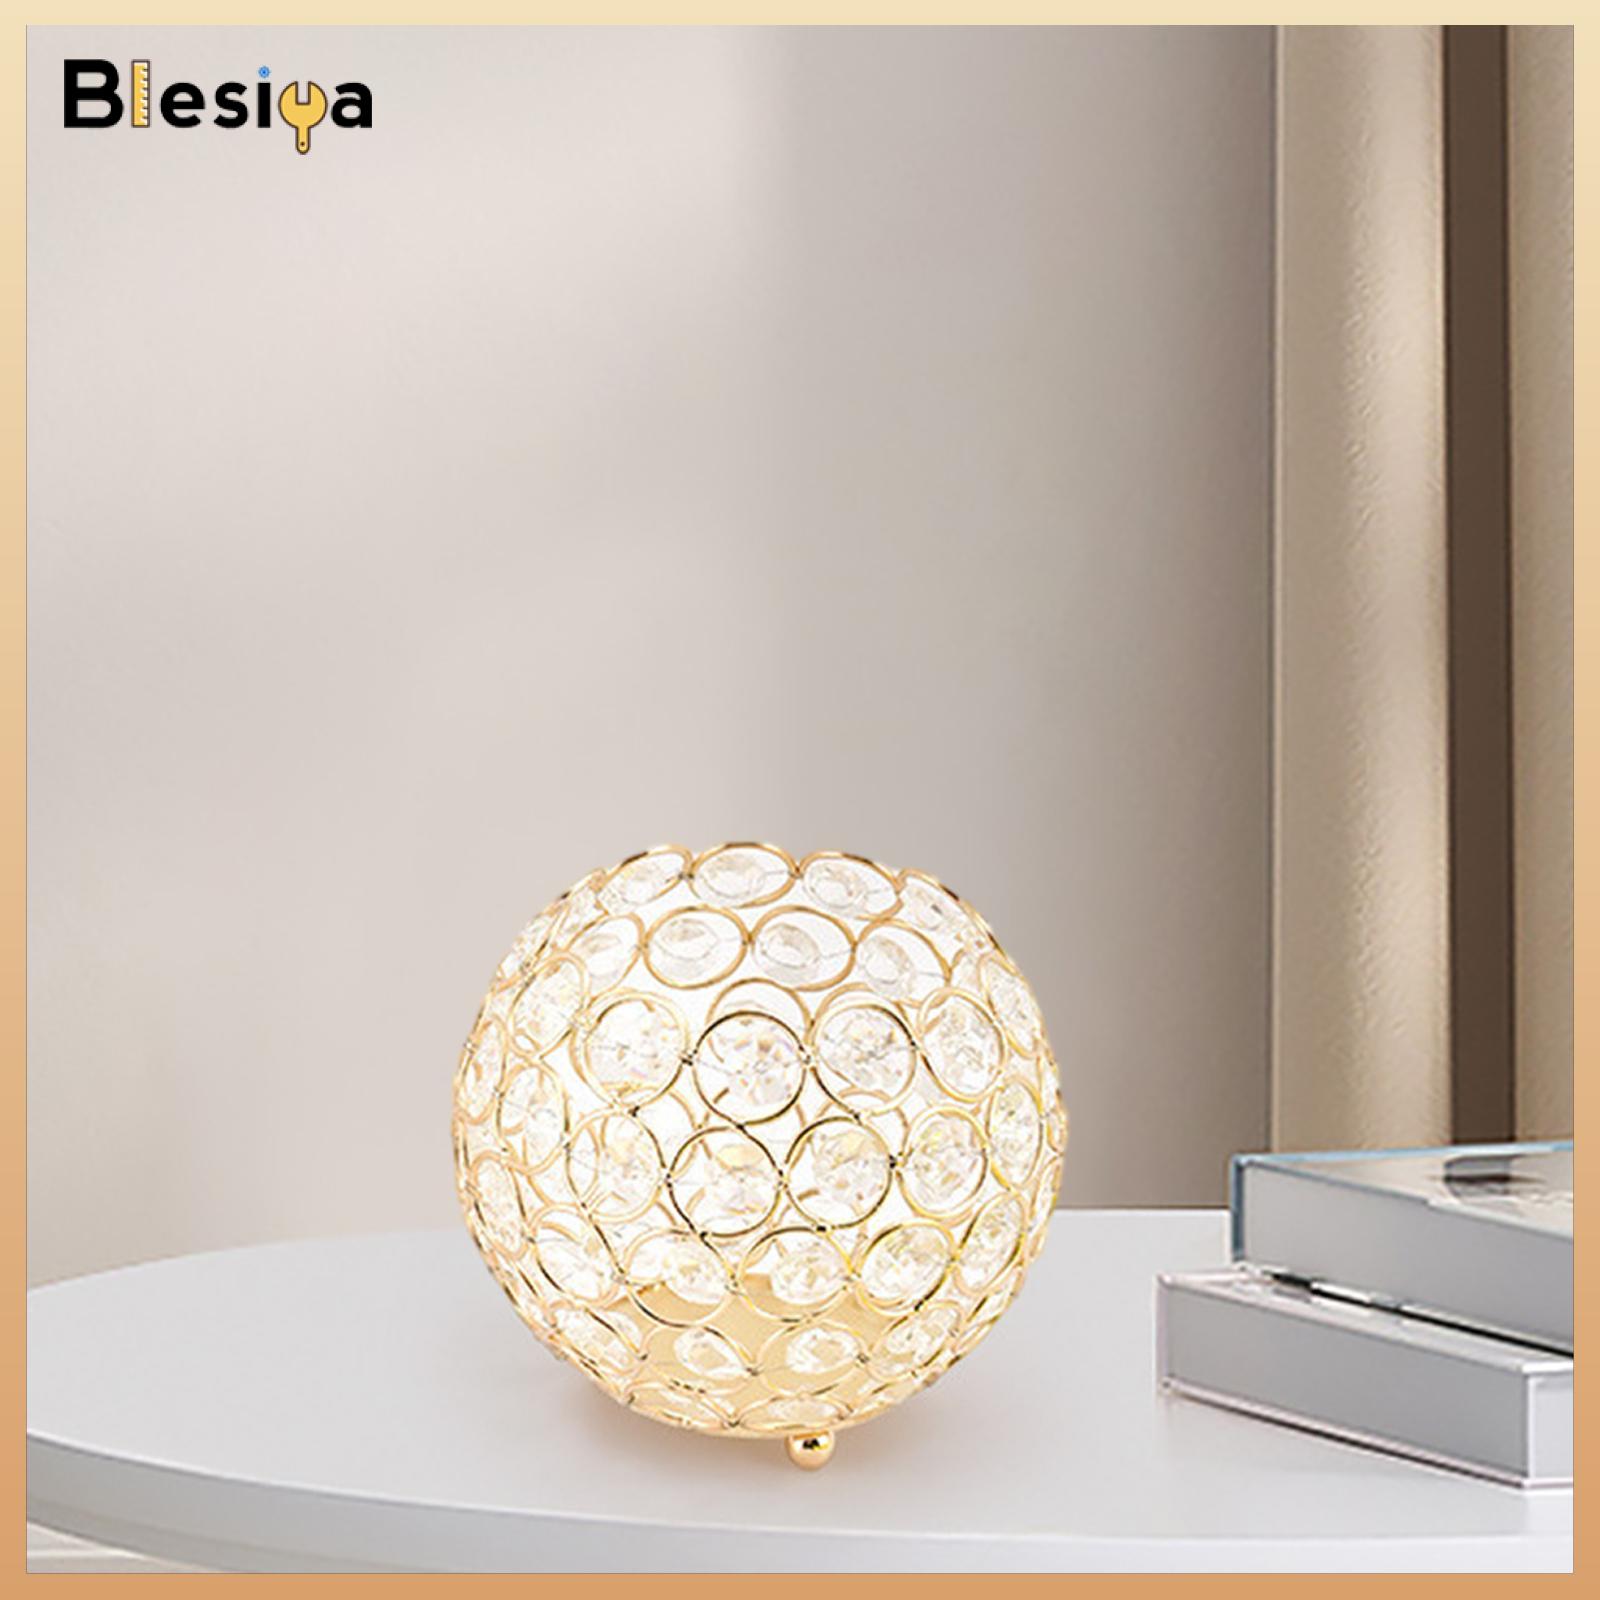 Blesiya Crystal Lampshade Hollow Library Chandelier Reading Lamp Round